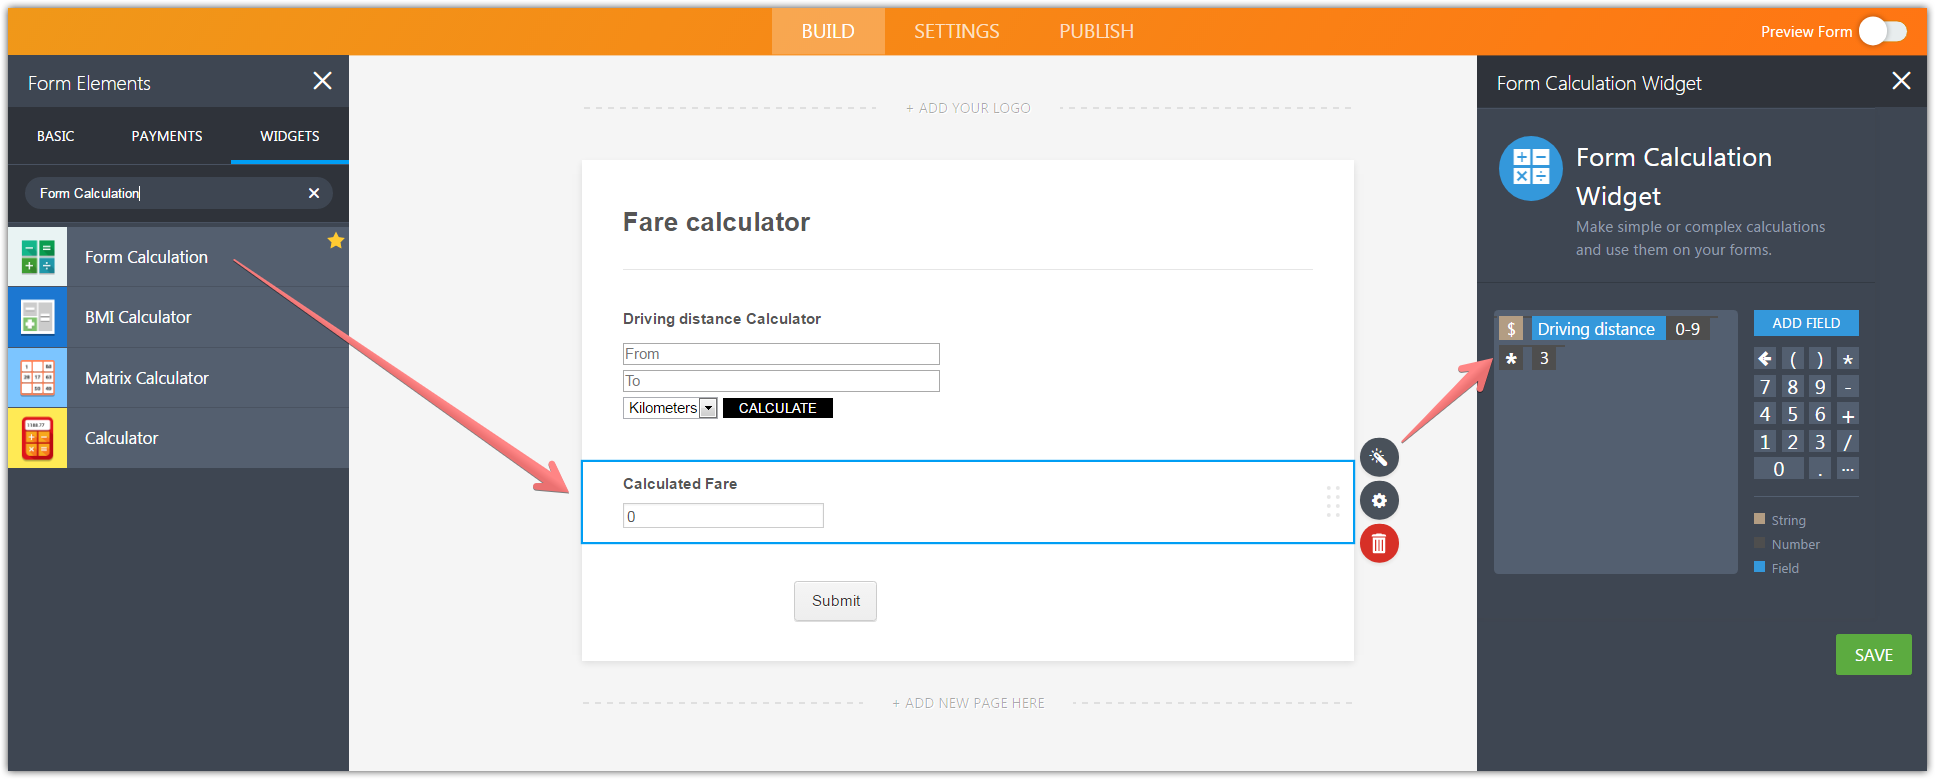 Calculating fare based on a driving distance using webform Image 2 Screenshot 41